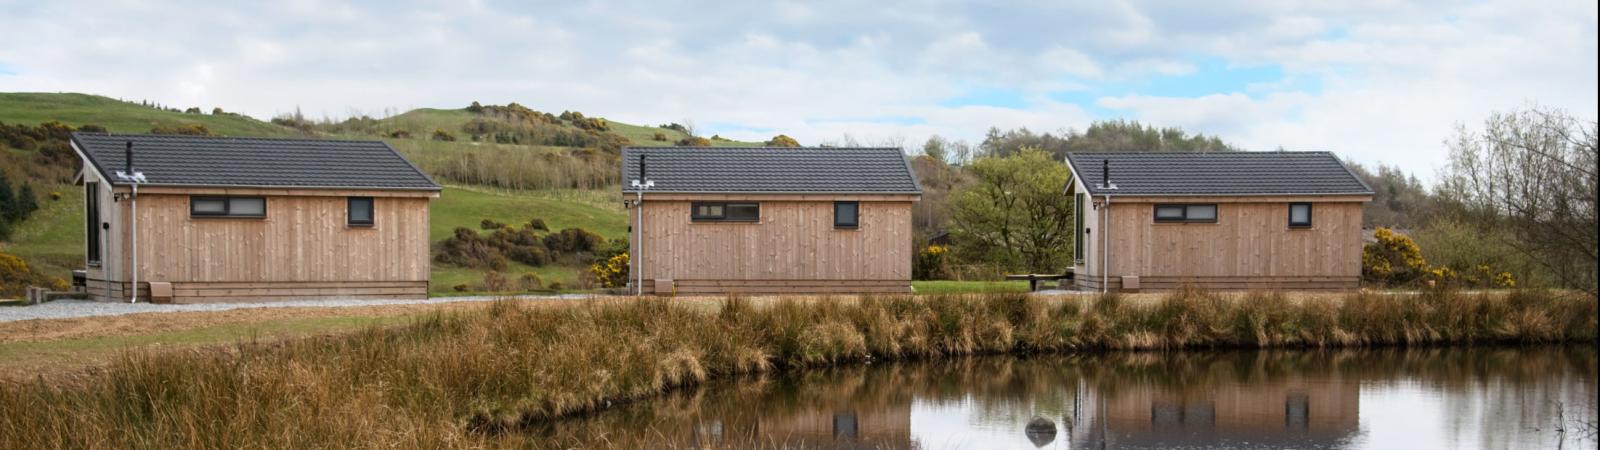 Holiday lodges at the Pond